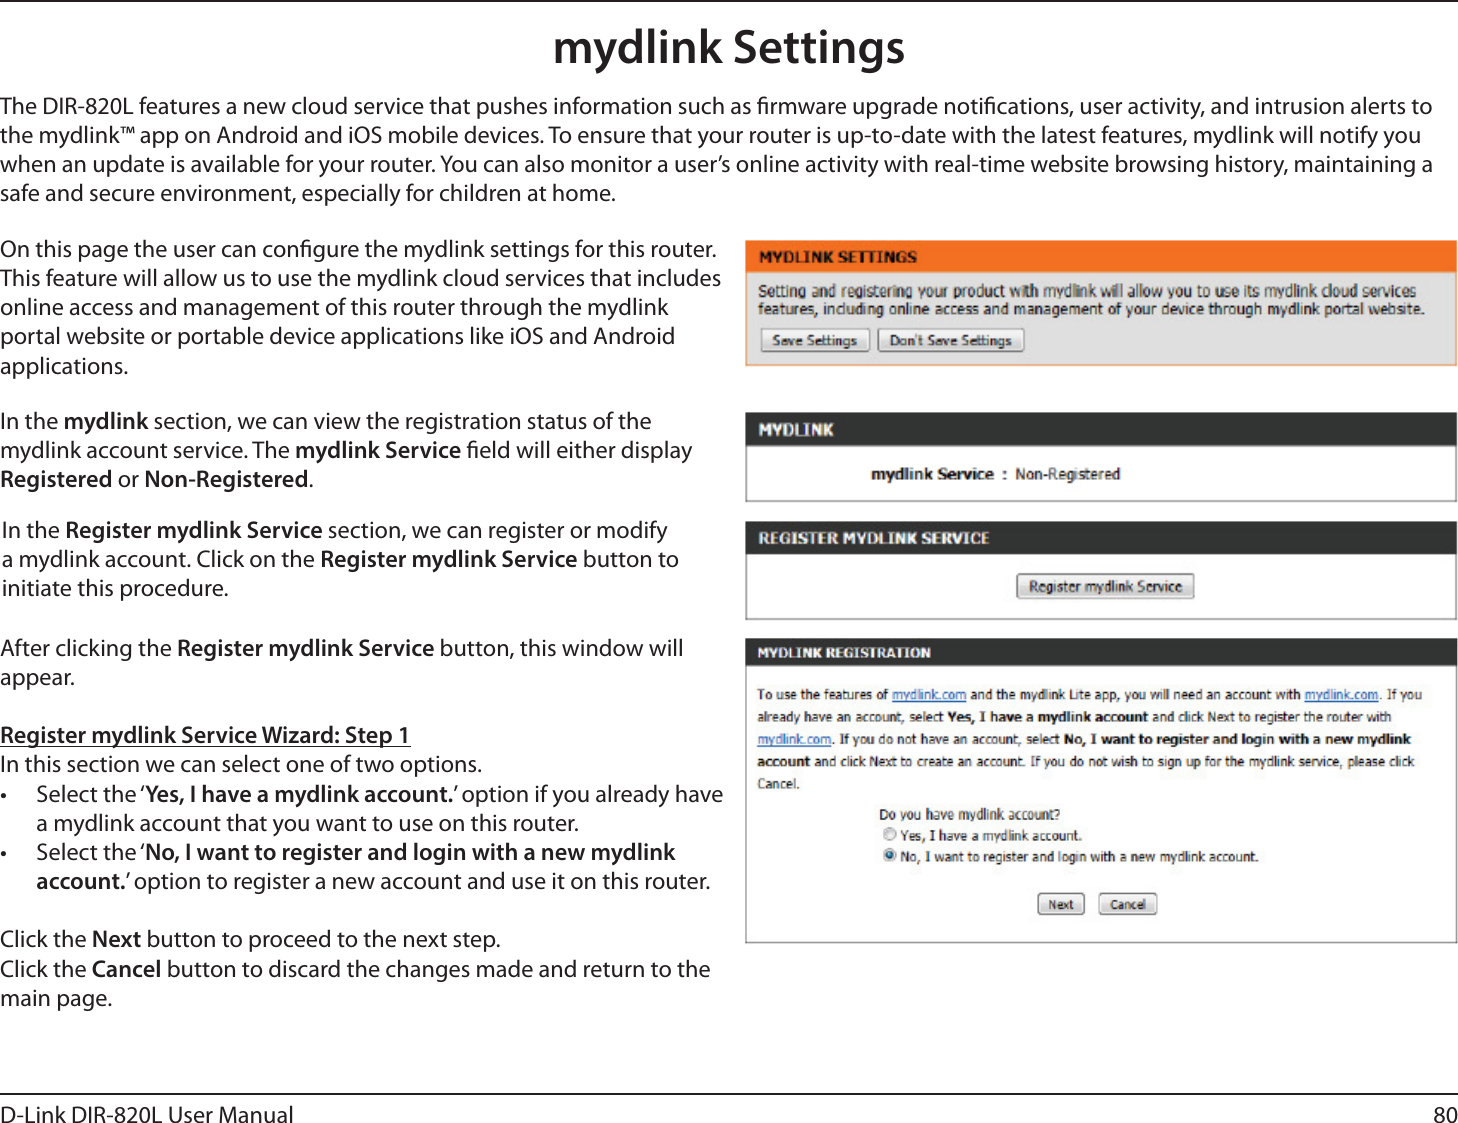 80D-Link DIR-820L User Manualmydlink SettingsOn this page the user can congure the mydlink settings for this router. This feature will allow us to use the mydlink cloud services that includes online access and management of this router through the mydlink portal website or portable device applications like iOS and Android applications.In the mydlink section, we can view the registration status of the mydlink account service. The mydlink Service eld will either display Registered or Non-Registered.In the Register mydlink Service section, we can register or modify a mydlink account. Click on the Register mydlink Service button to initiate this procedure.After clicking the Register mydlink Service button, this window will appear.Register mydlink Service Wizard: Step 1In this section we can select one of two options.• Select the ‘Yes, I have a mydlink account.’ option if you already have a mydlink account that you want to use on this router. • Select the ‘No, I want to register and login with a new mydlink account.’ option to register a new account and use it on this router.Click the Next button to proceed to the next step. Click the Cancel button to discard the changes made and return to the main page.The DIR-820L features a new cloud service that pushes information such as rmware upgrade notications, user activity, and intrusion alerts to the mydlink™ app on Android and iOS mobile devices. To ensure that your router is up-to-date with the latest features, mydlink will notify you when an update is available for your router. You can also monitor a user’s online activity with real-time website browsing history, maintaining a safe and secure environment, especially for children at home.